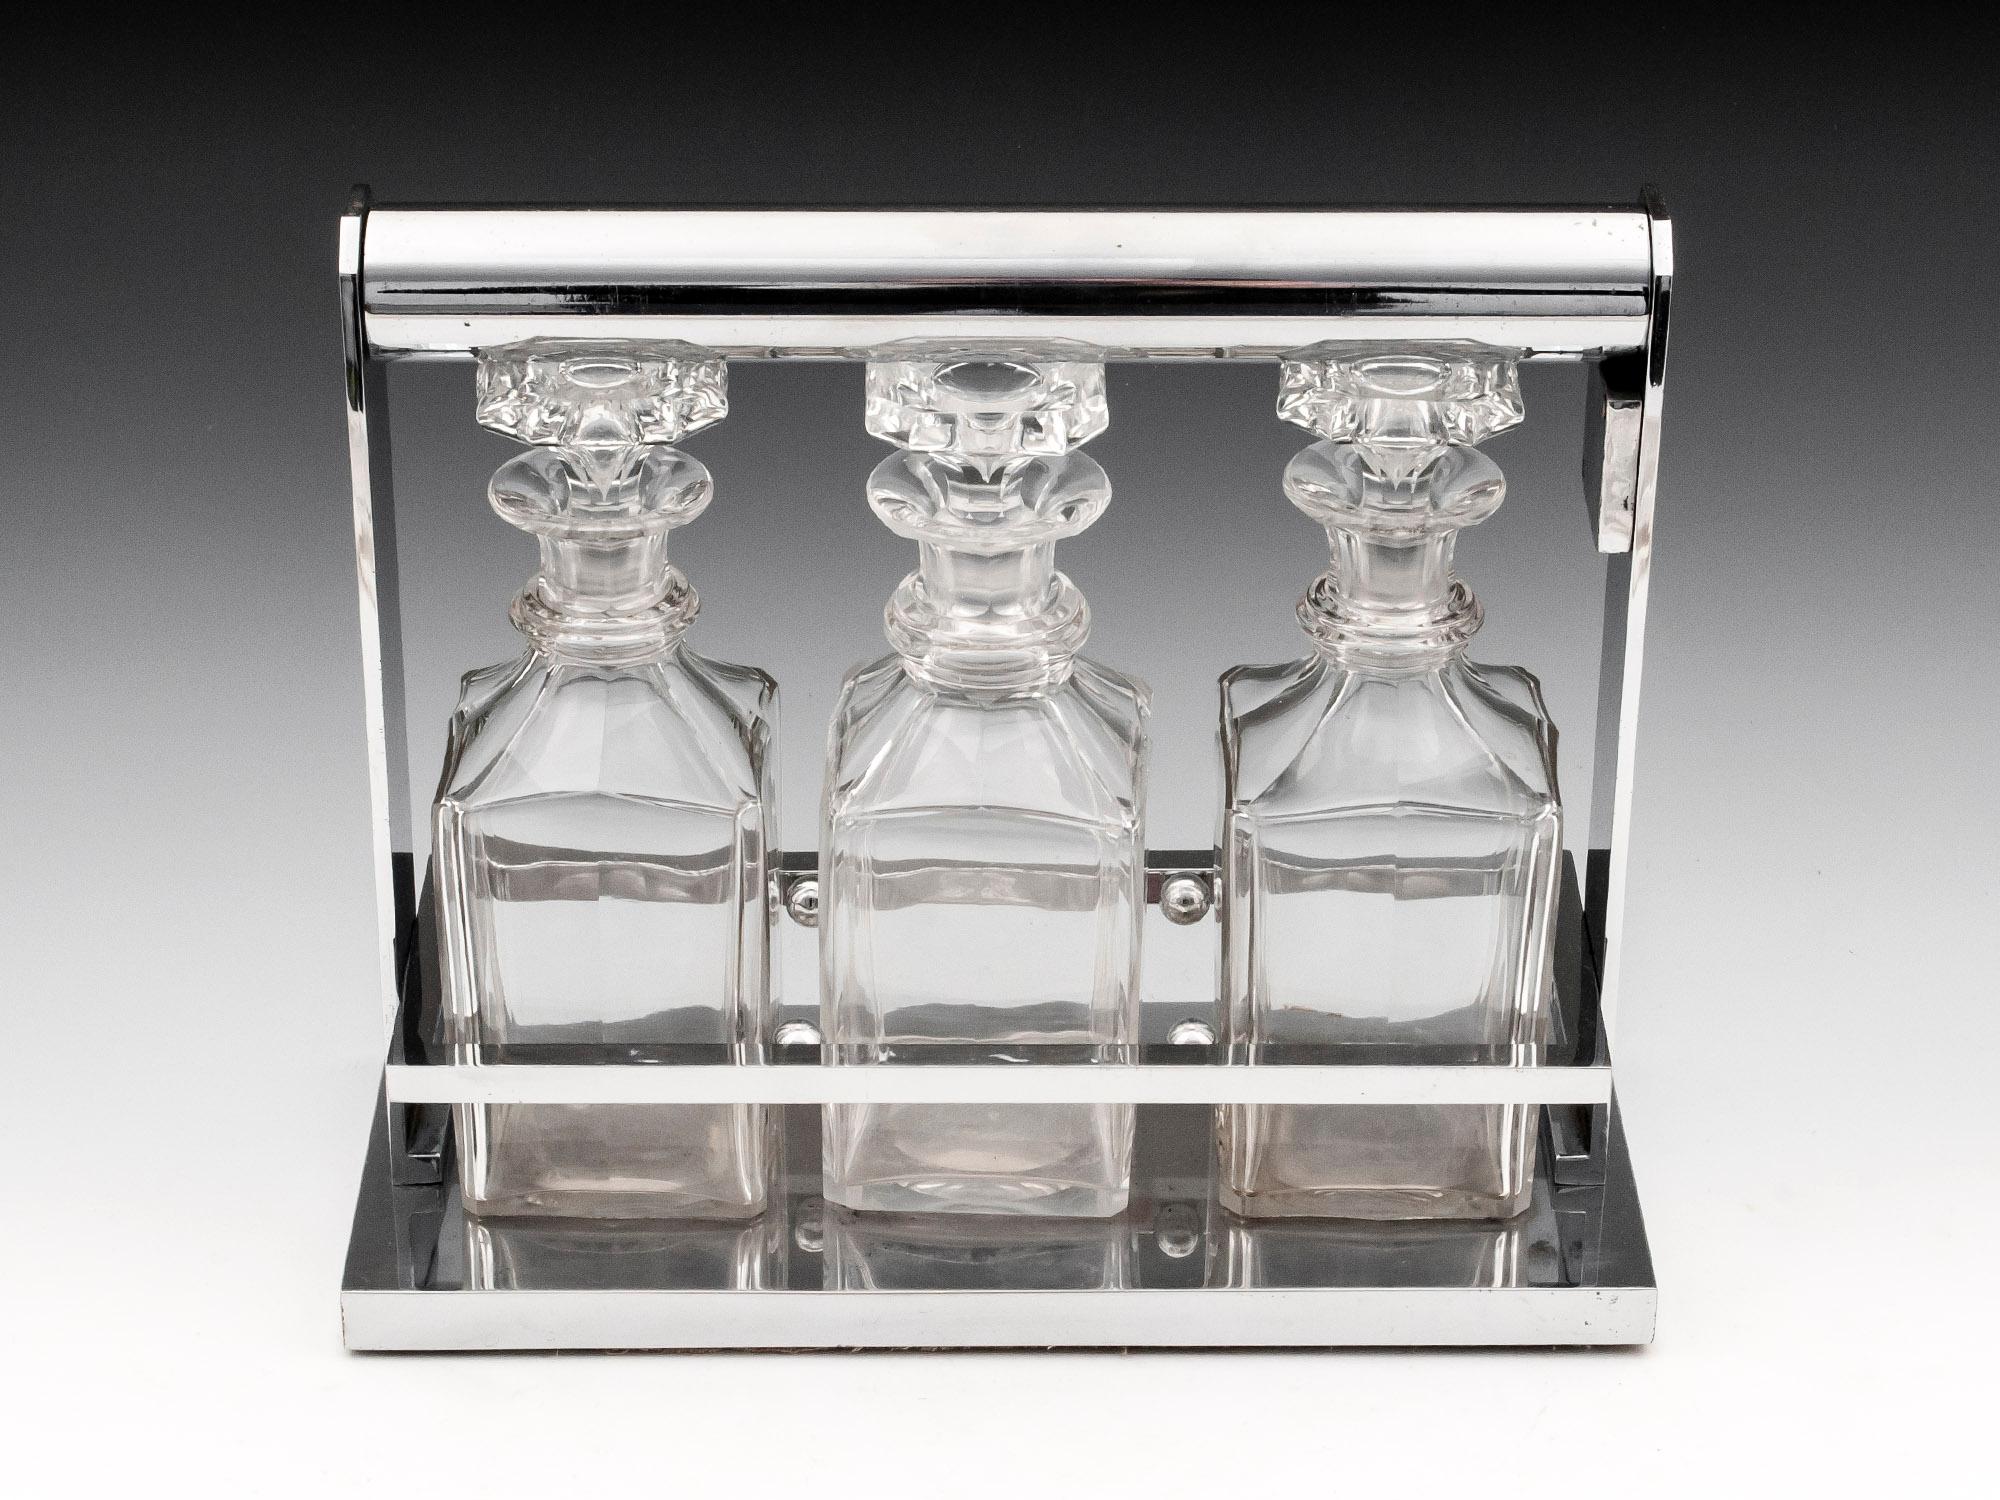 Chromium Plated 

From our Tantalus collection, we are pleased to offer this Jacques Adnet Tantalus. The Tantalus of regular form with a Chromium plated body featuring three crystal glass decanters with stoppers. When unlocked the carry handle